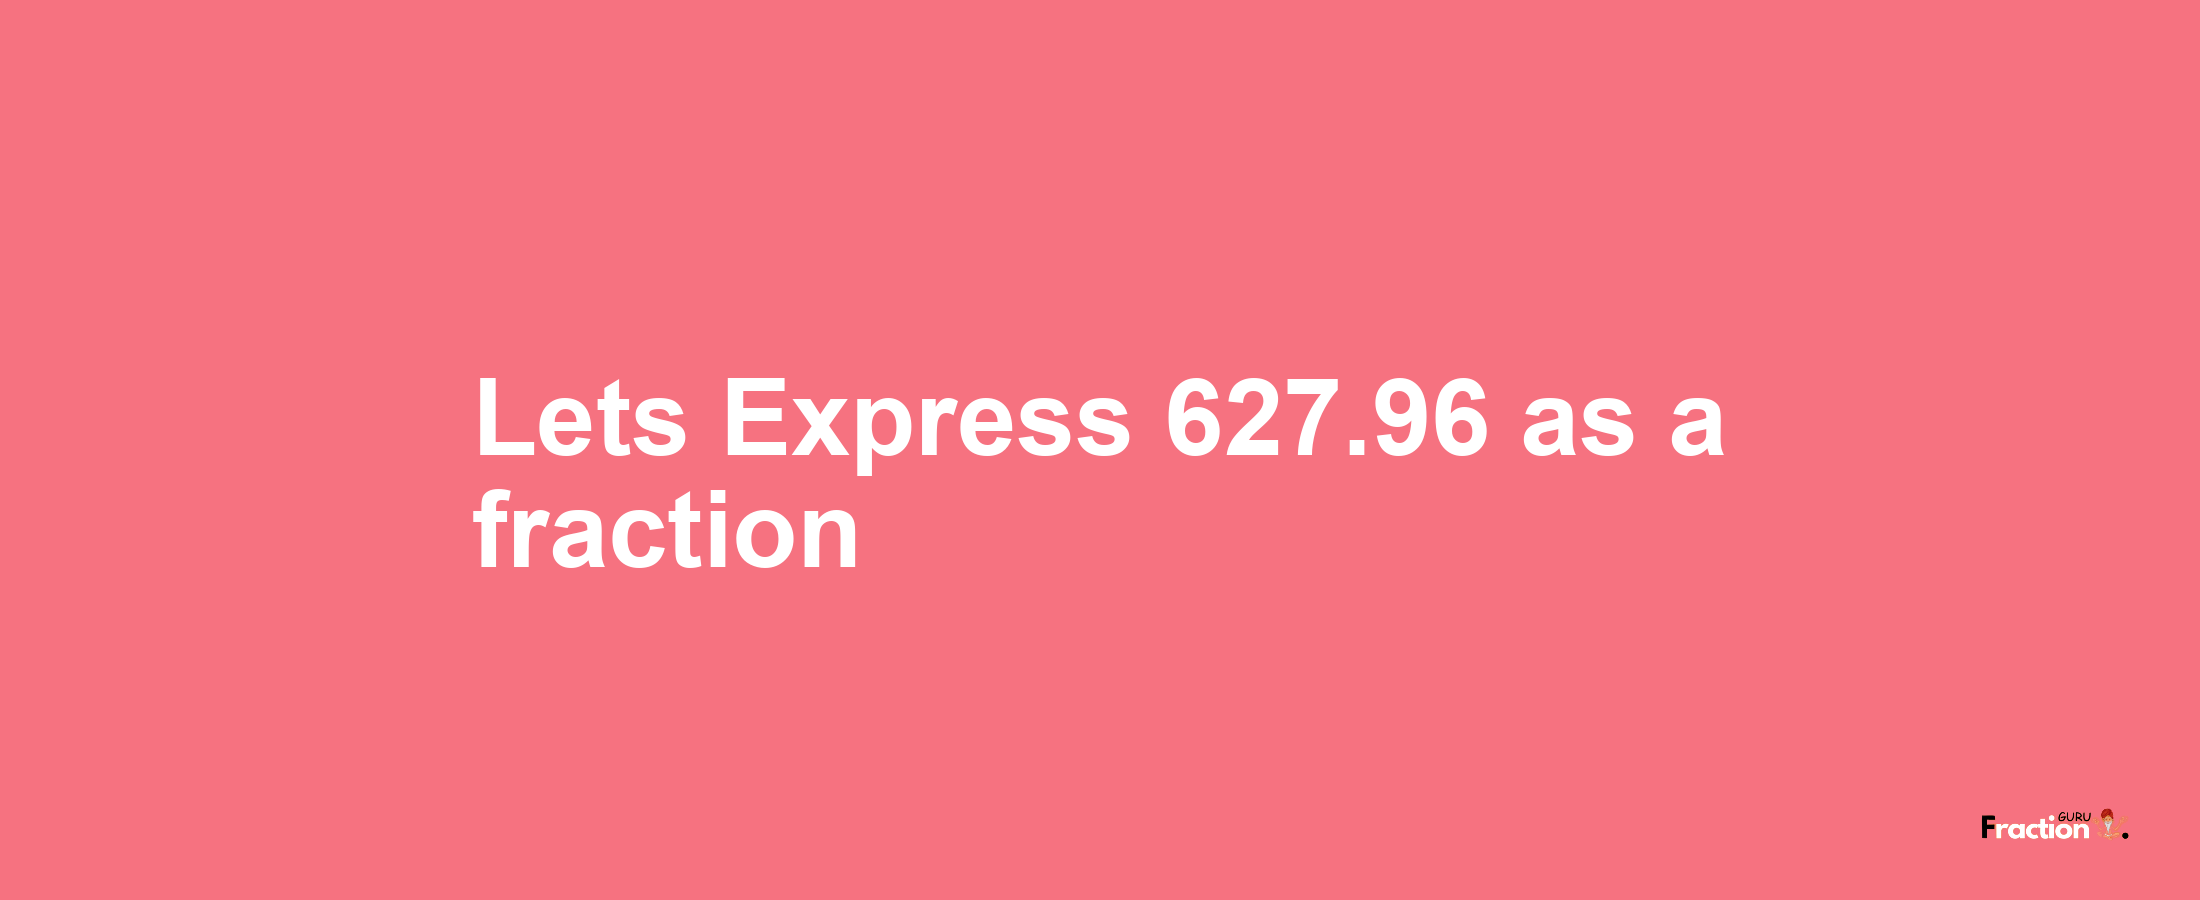 Lets Express 627.96 as afraction